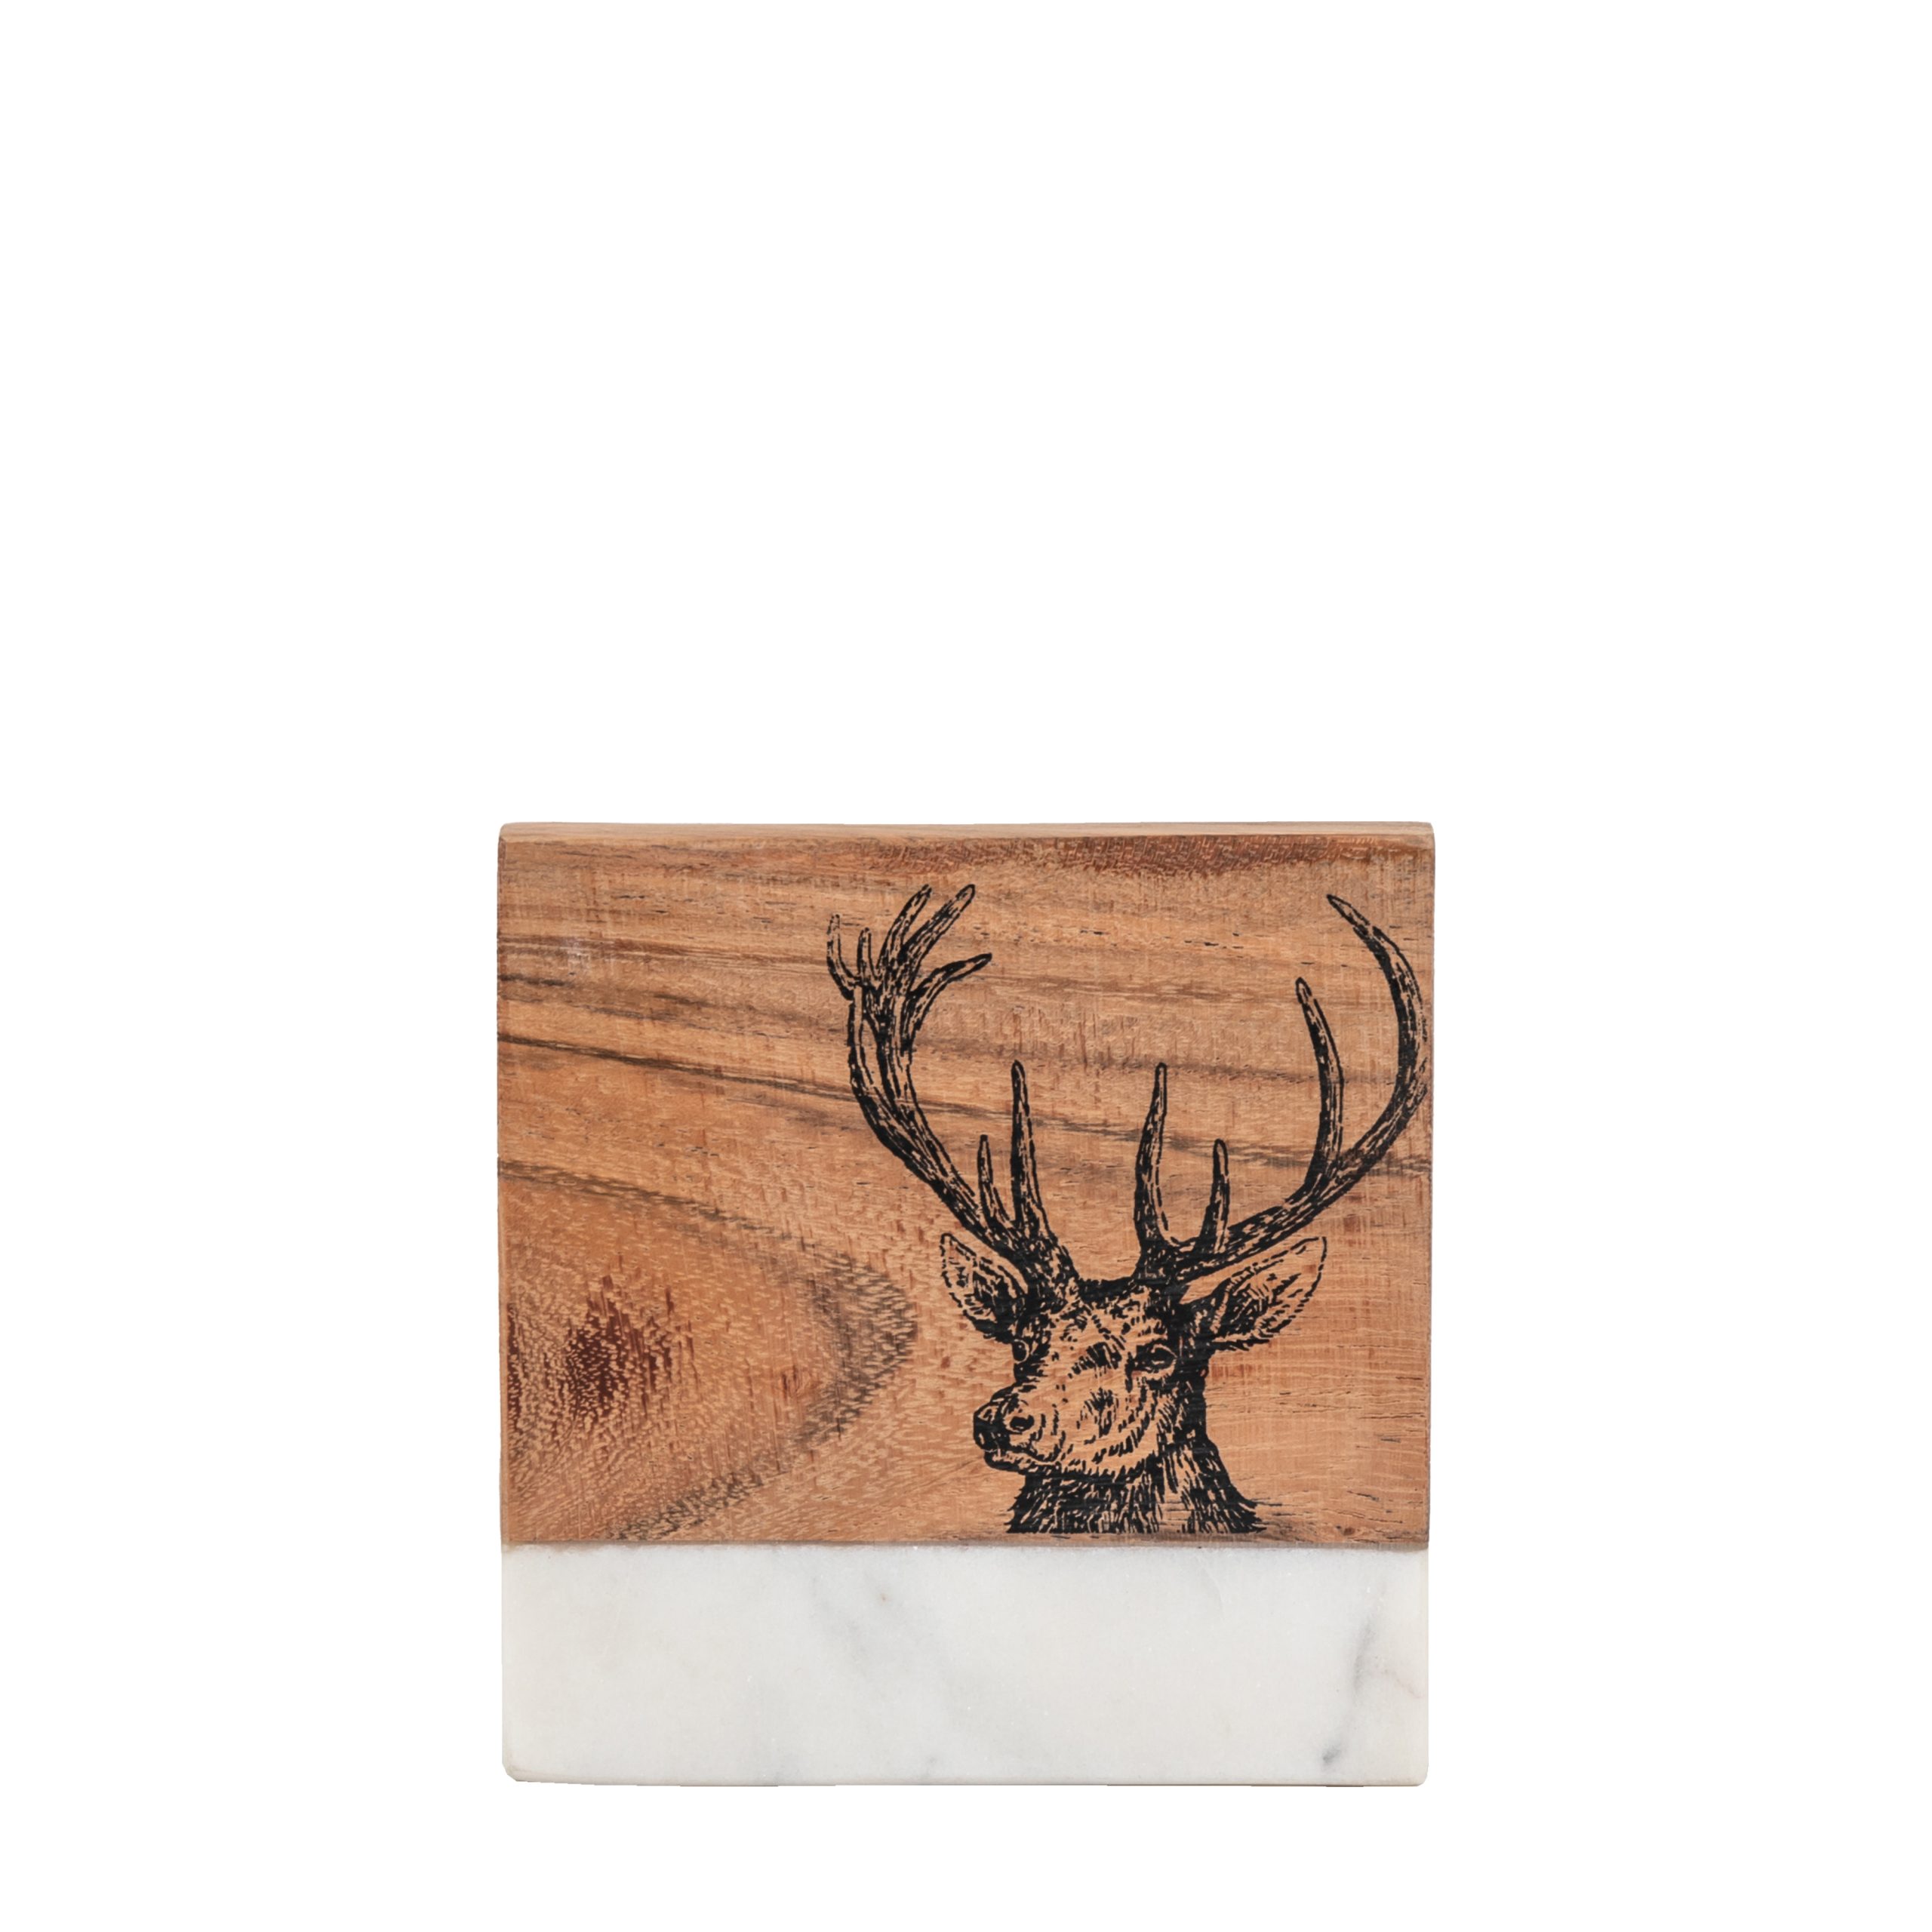 Gallery Direct Stag Coasters White Marble (Set of 4)